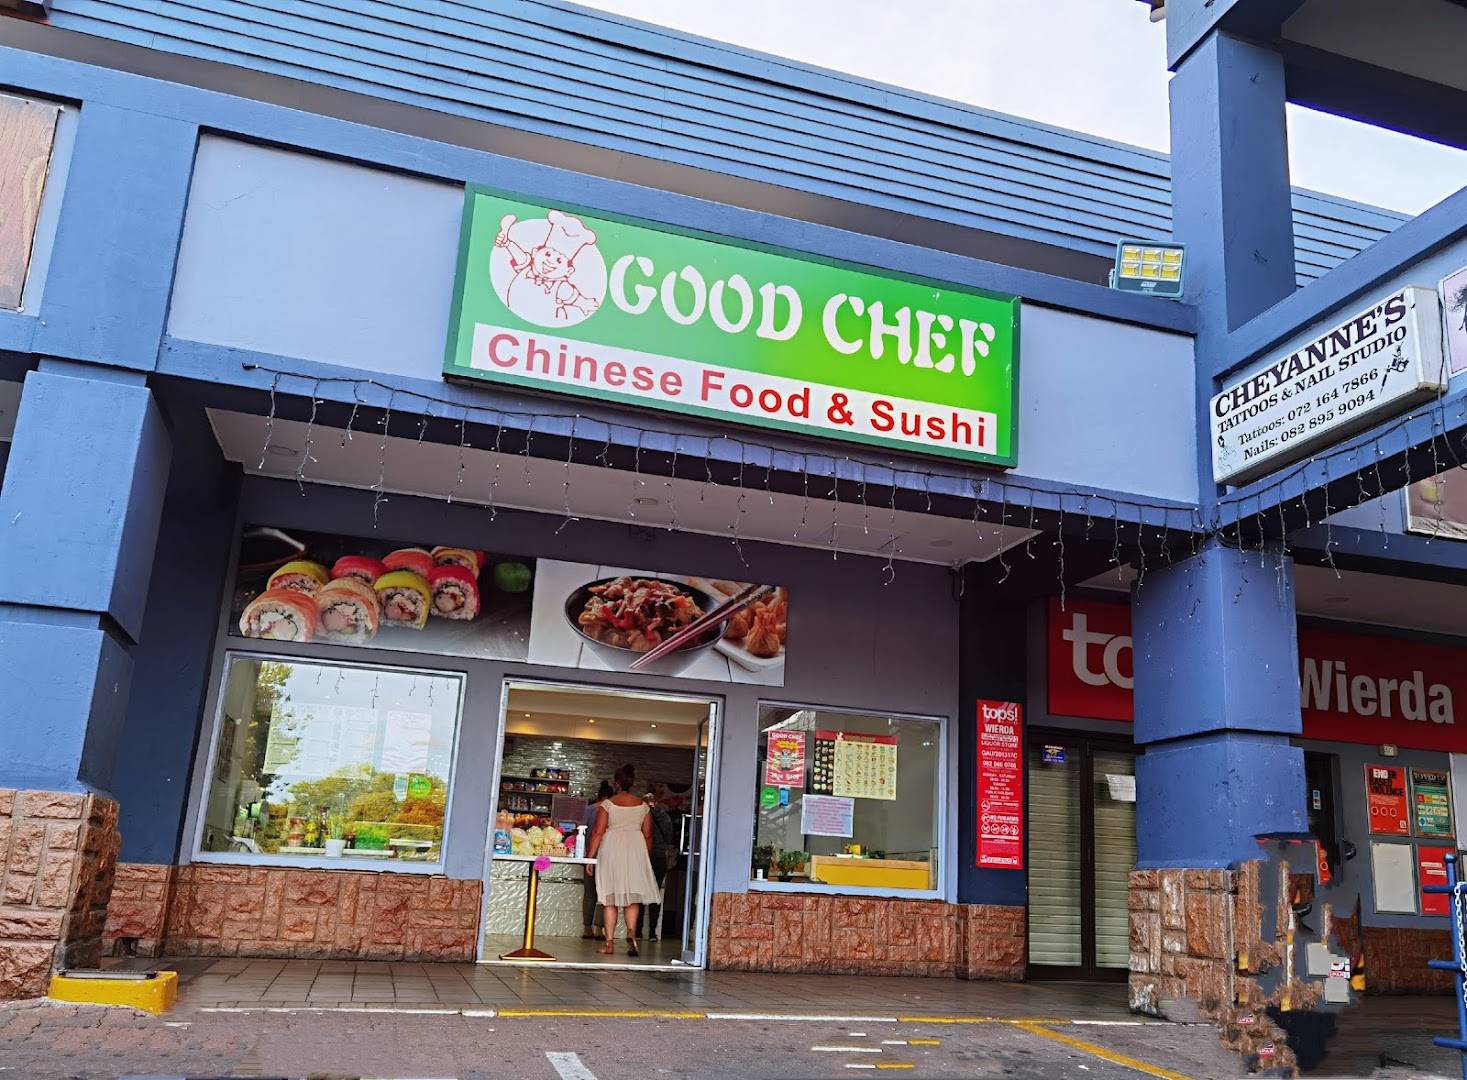 Good chef Chinese Food and Sushi